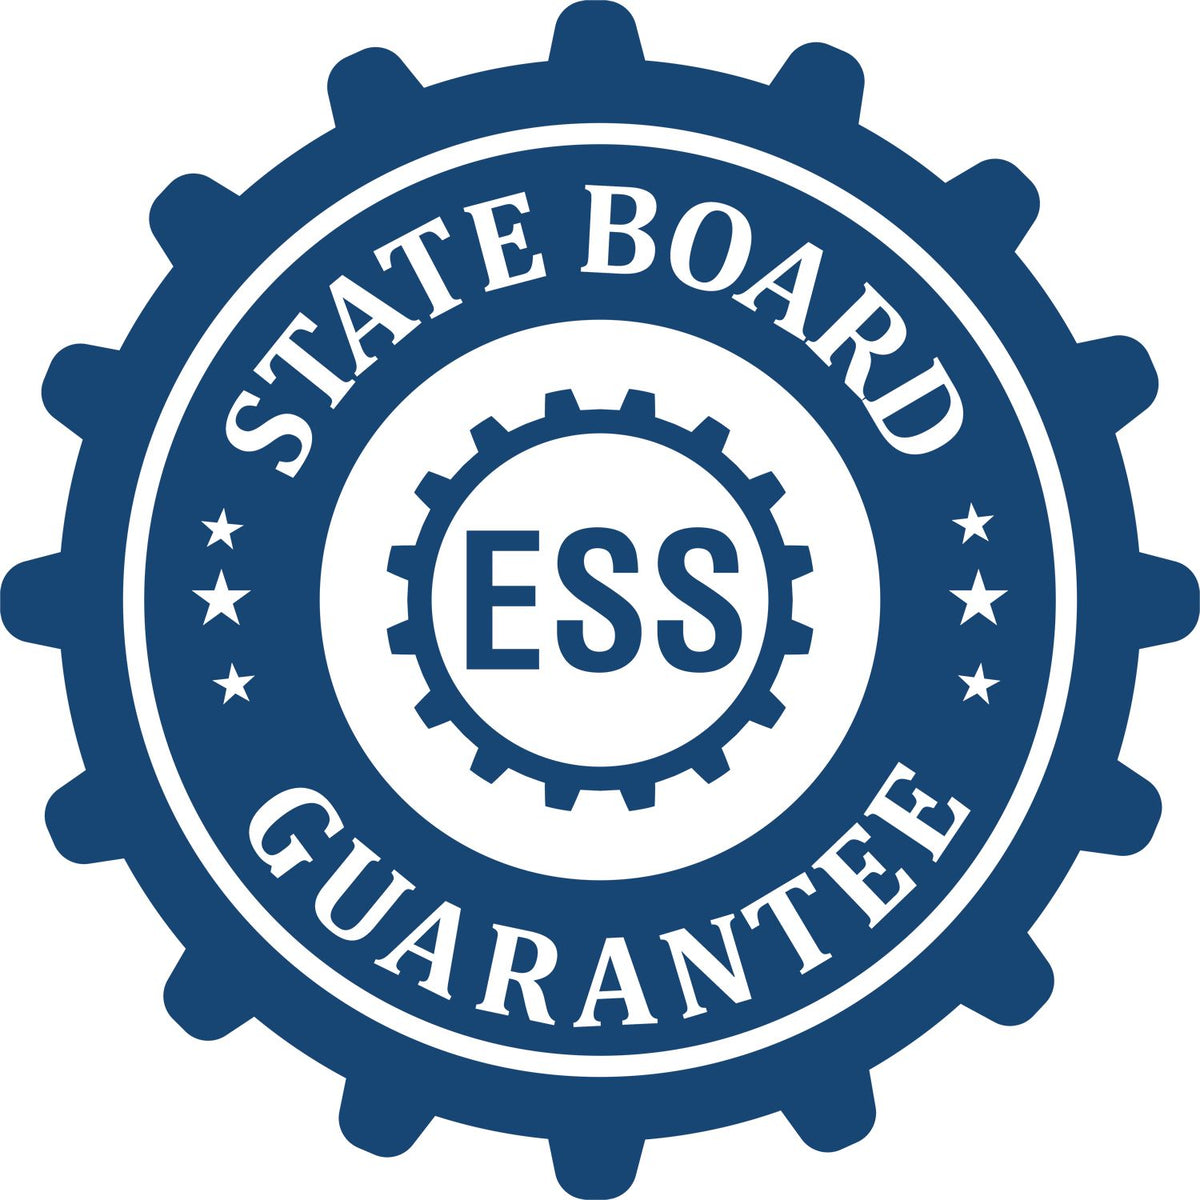 An emblem in a gear shape illustrating a state board guarantee for the Hybrid Delaware Landscape Architect Seal